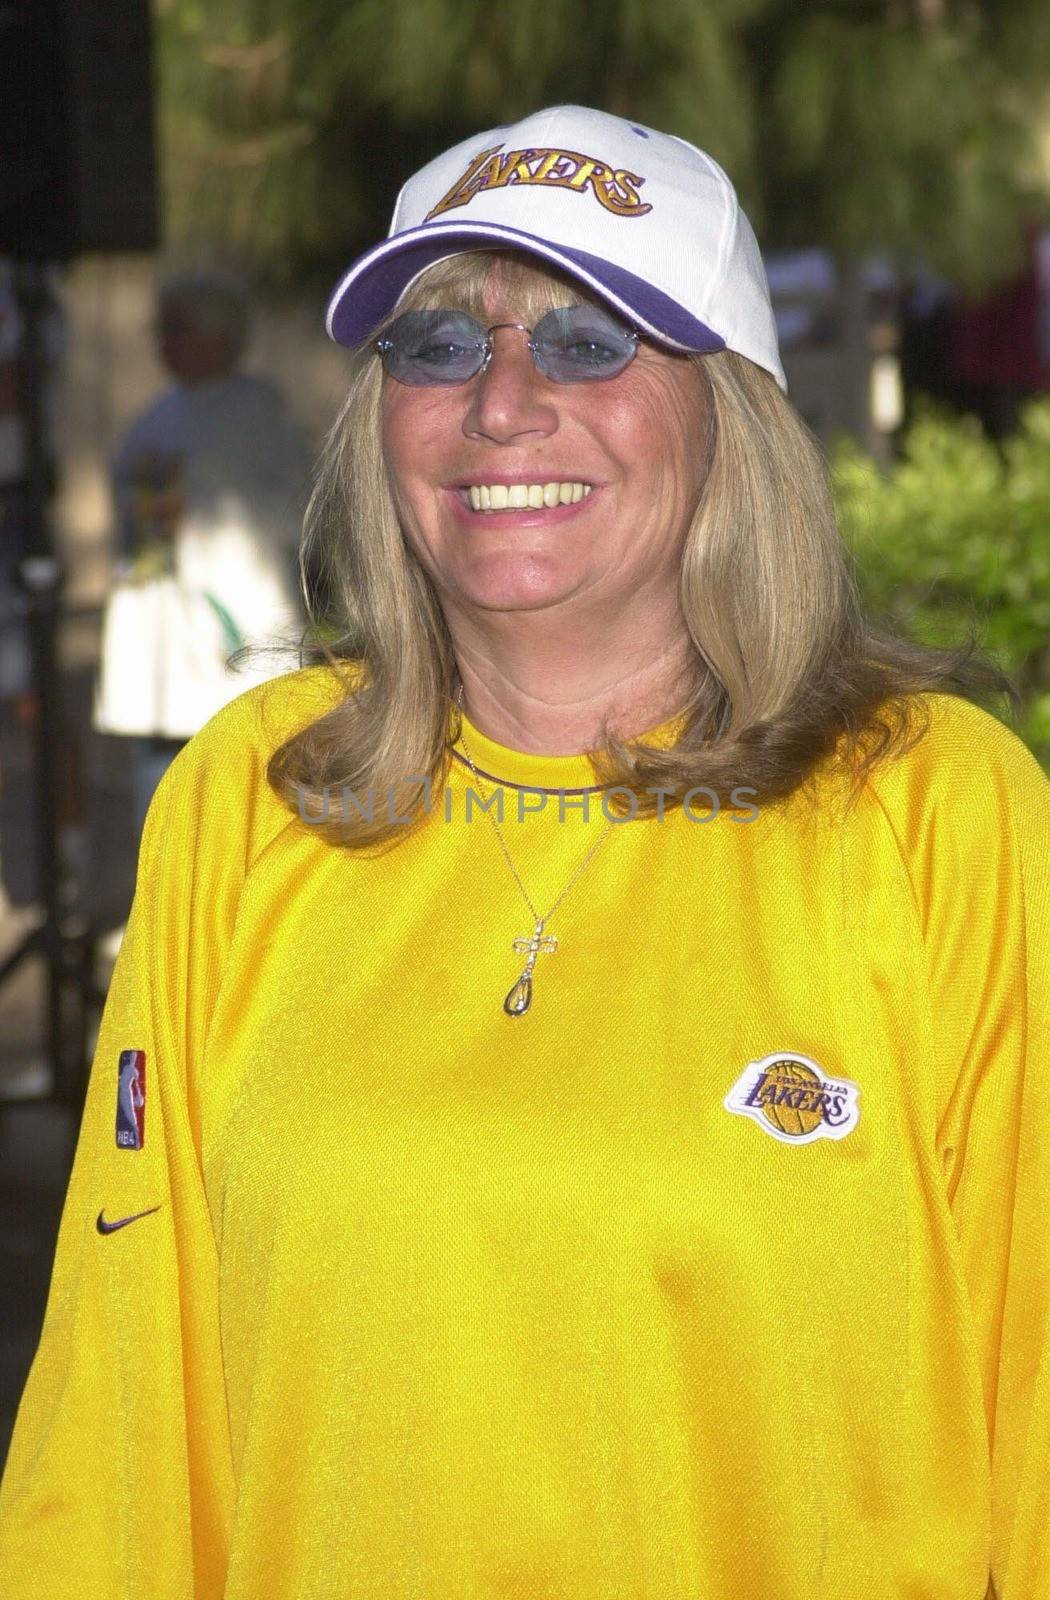 Penny Marshall at the MS Walk 2000, where the cast of "Laverne and Shirley" reunited. Burbank, 04-09-00